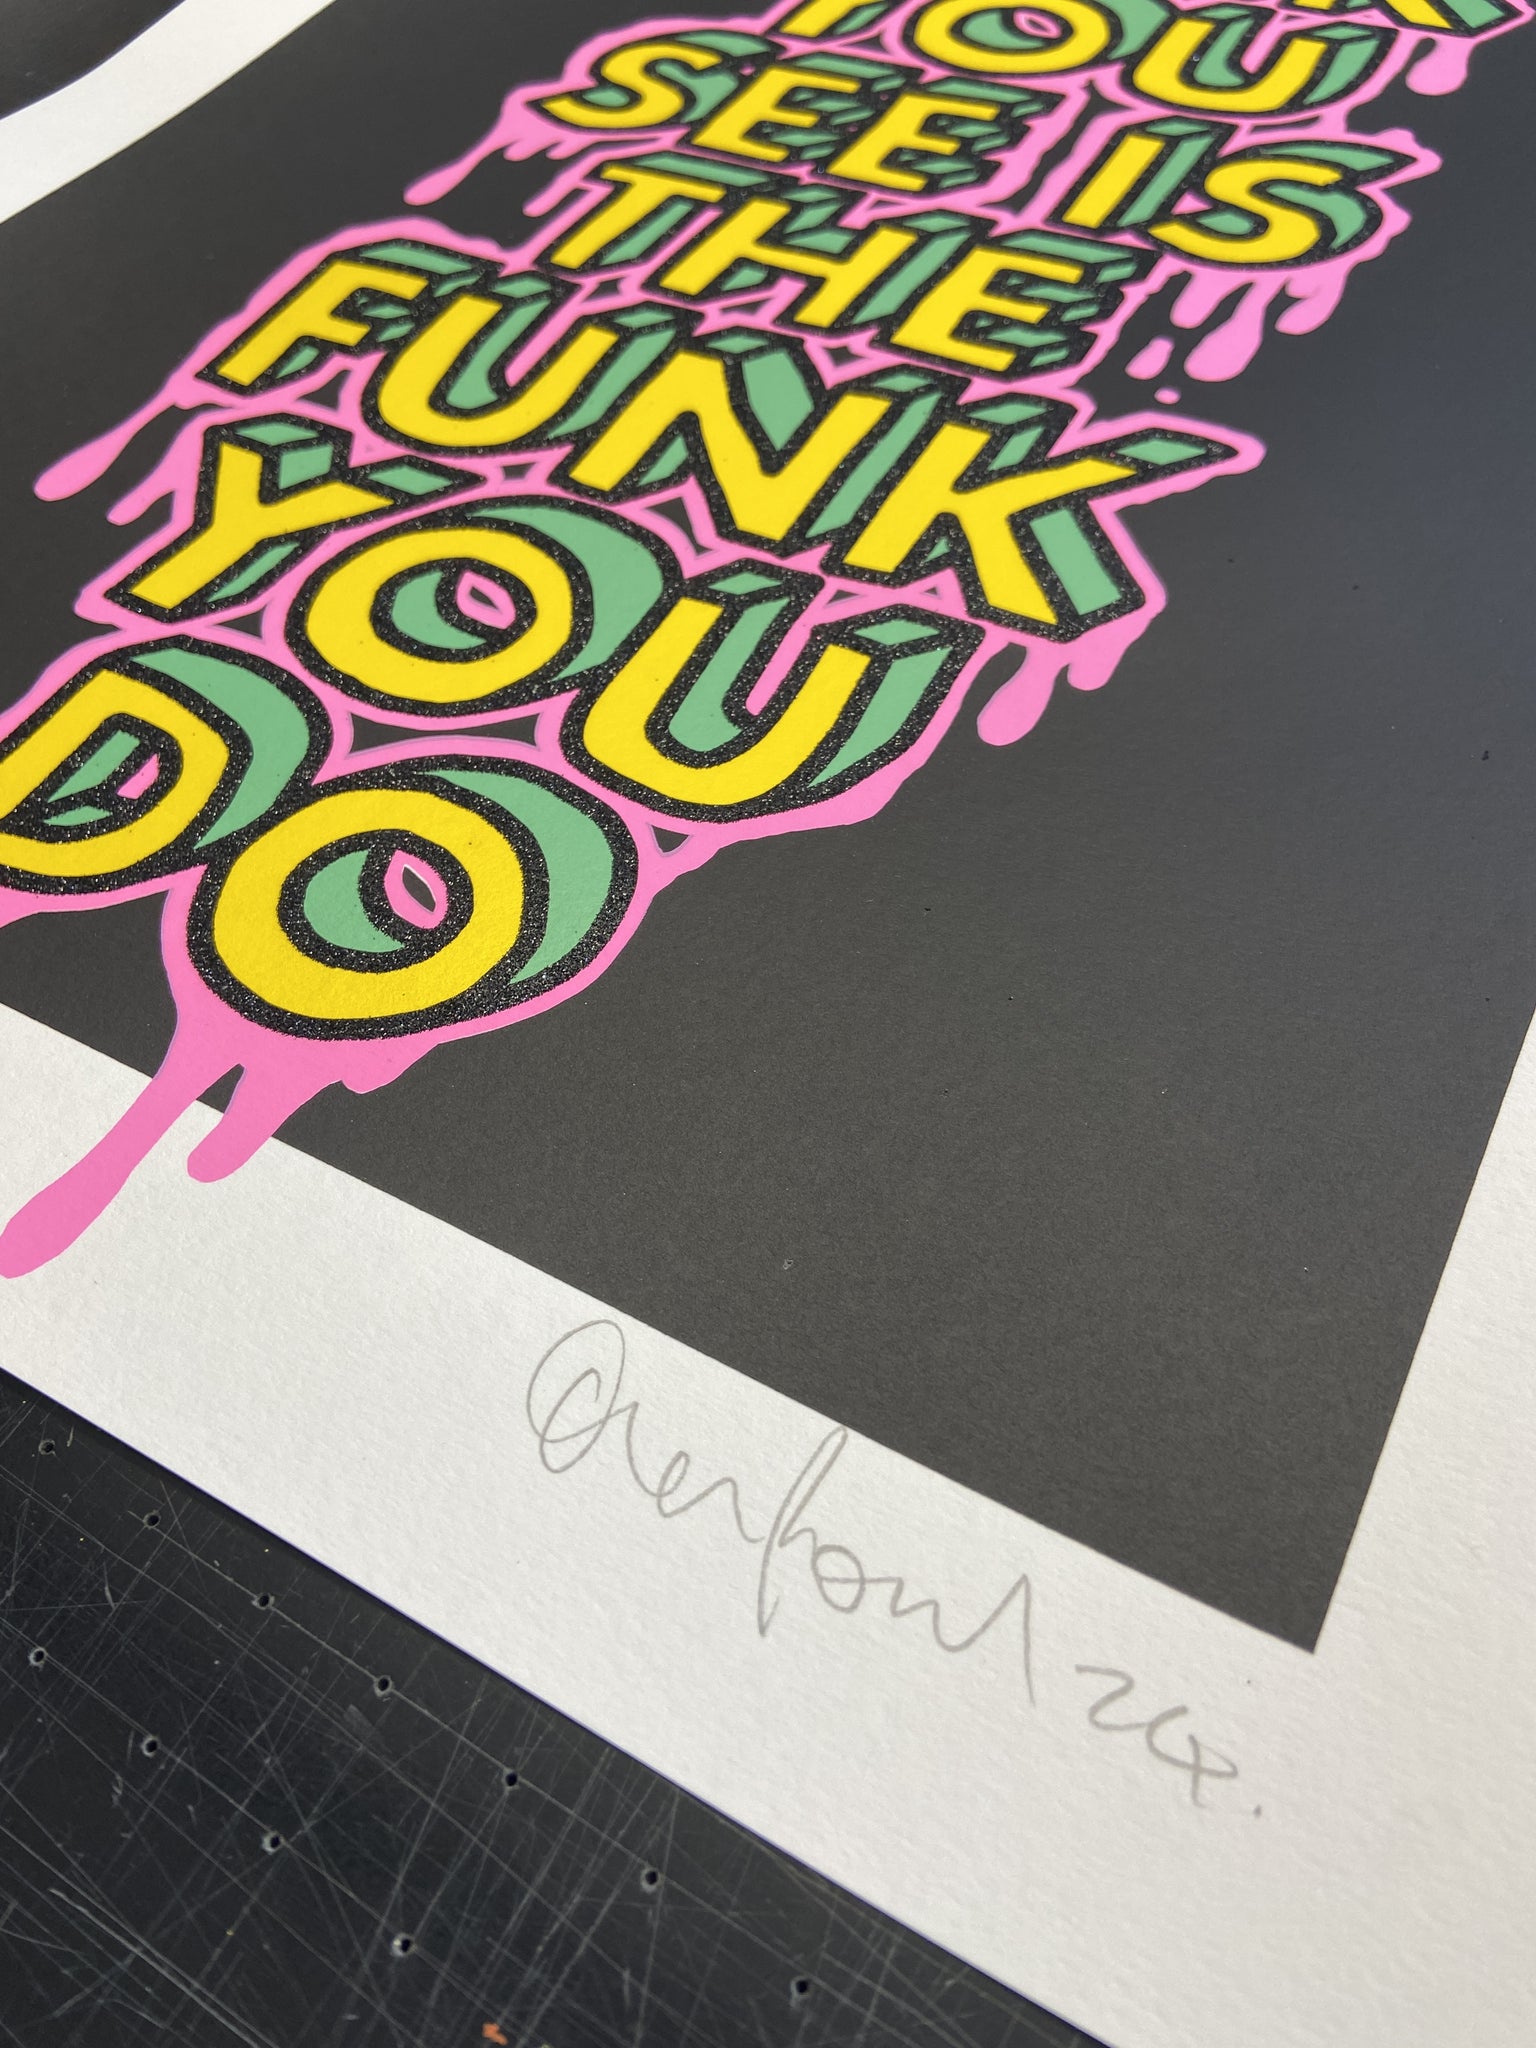 THE FUNK YOU SEE IS THE FUNK YOU DO (black glitter edition)